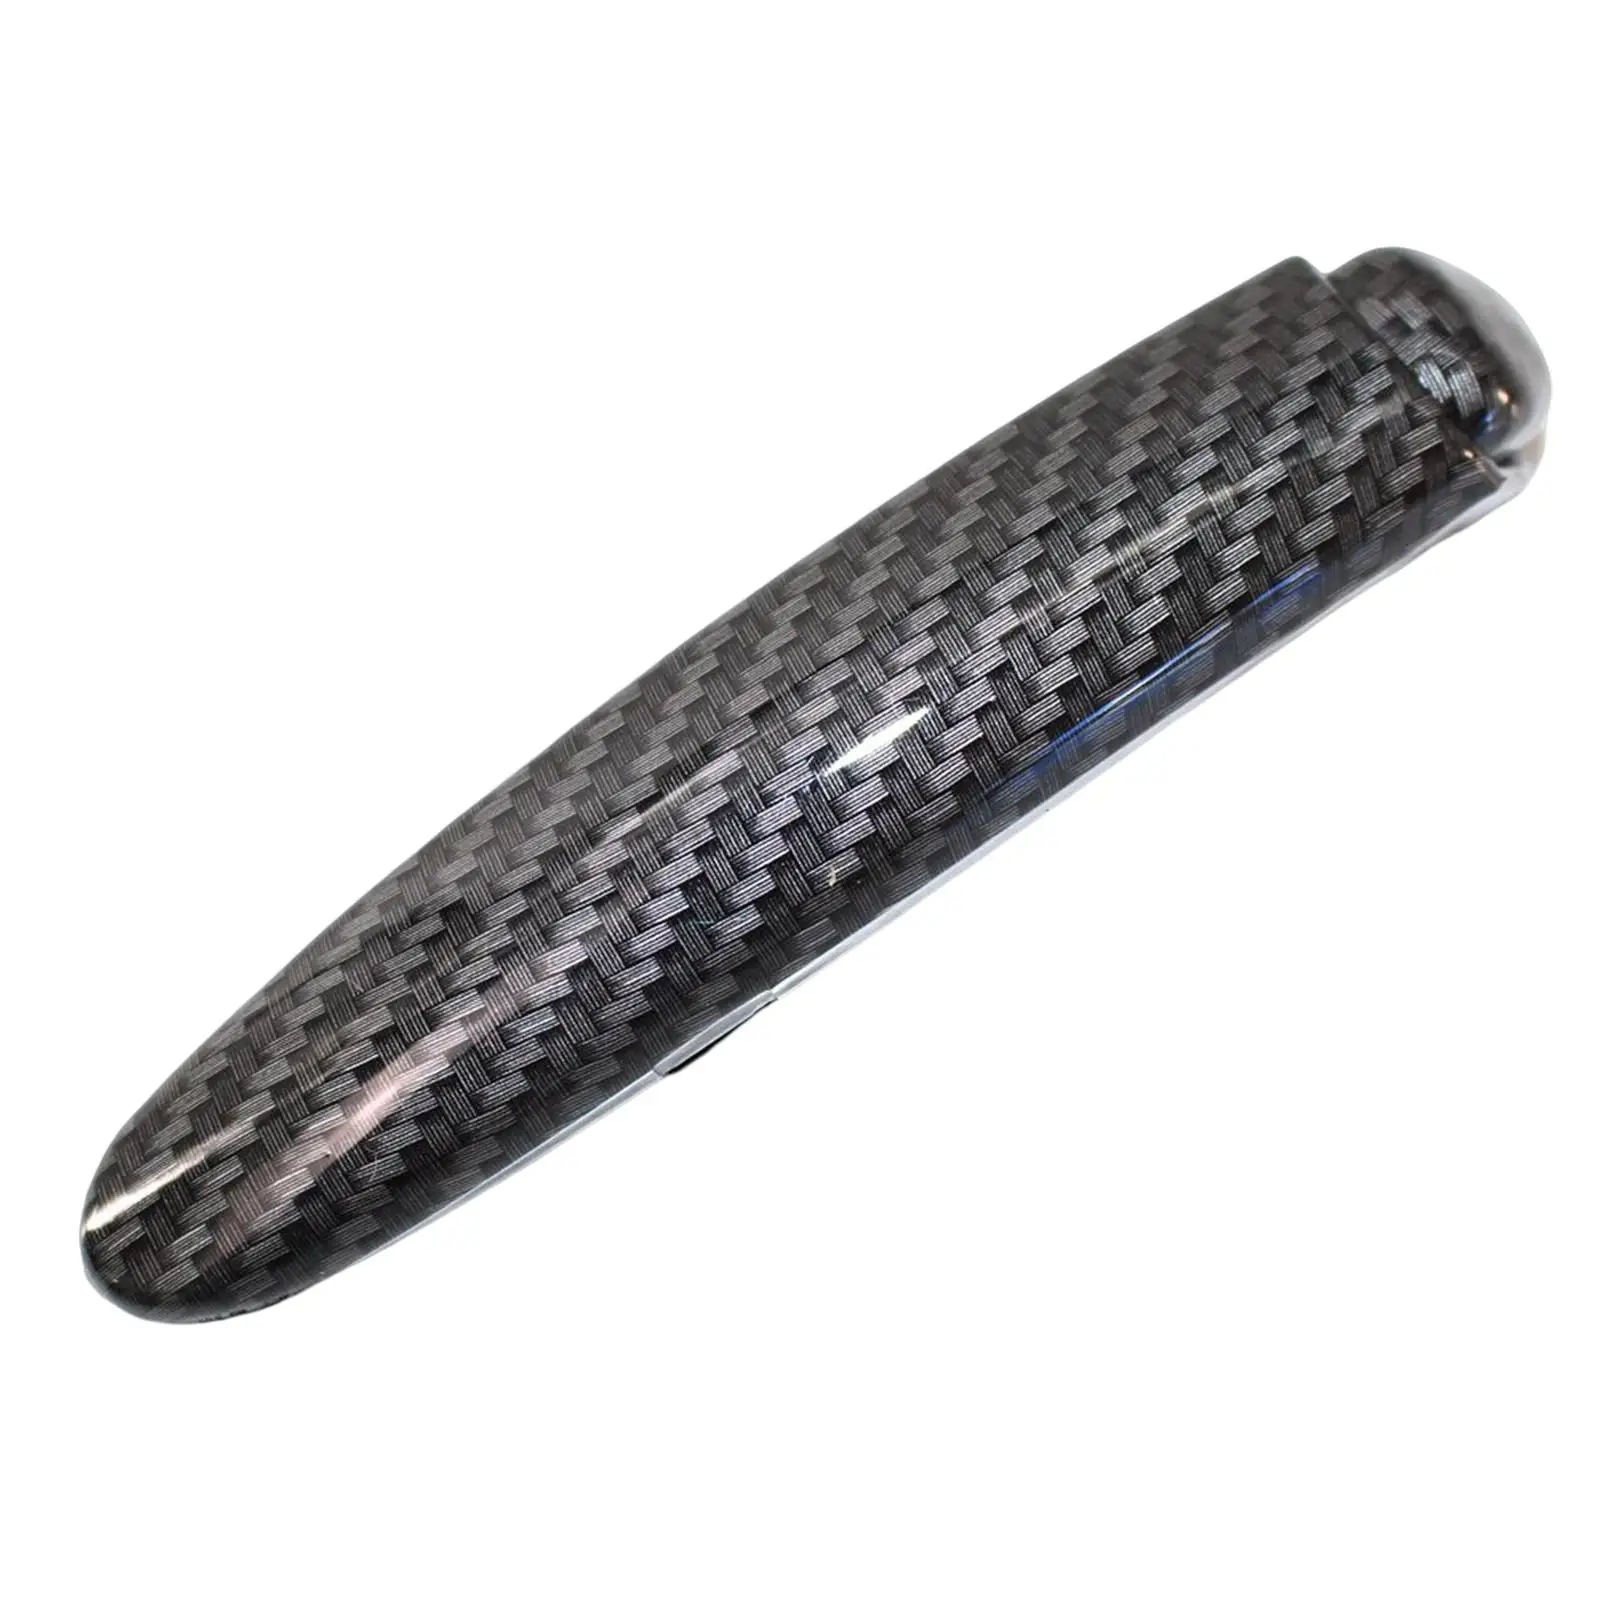 Parking Brake Handle Protect Cover 47115Snaa82ZA Carbon Fiber for Honda Civic 2006-2011 Professional Direct Replaces Parts